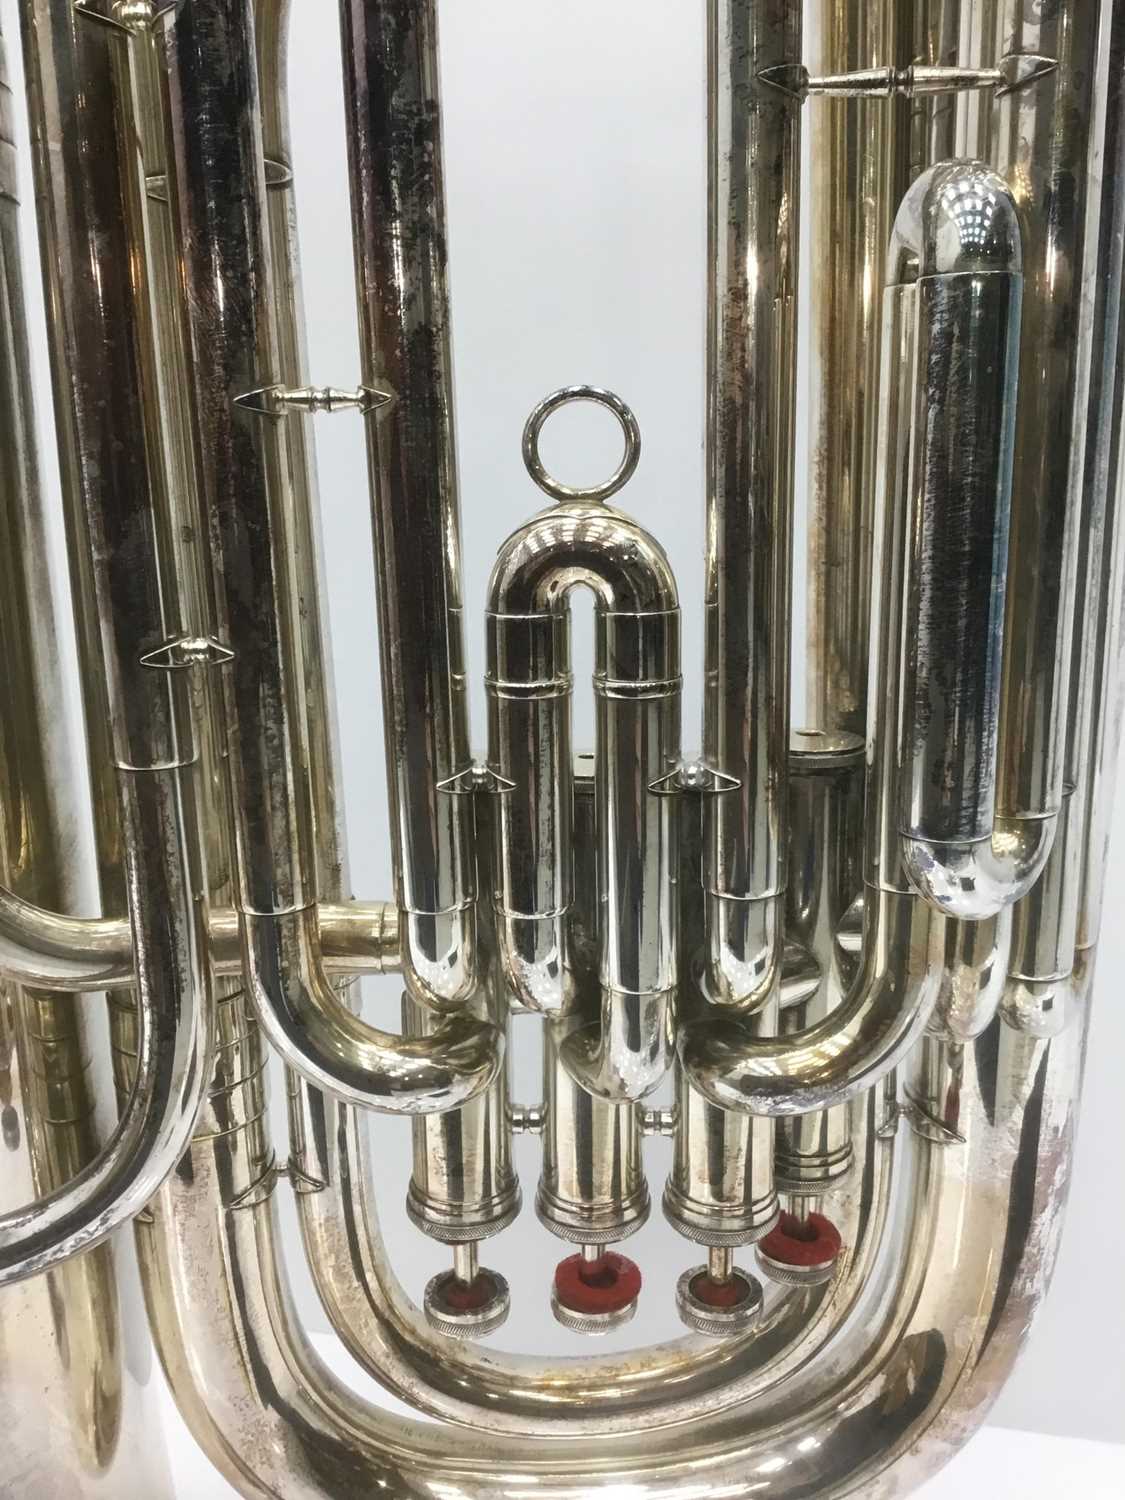 Weltklang silvered Bb four-valve tuba, 94cm high - Image 3 of 4